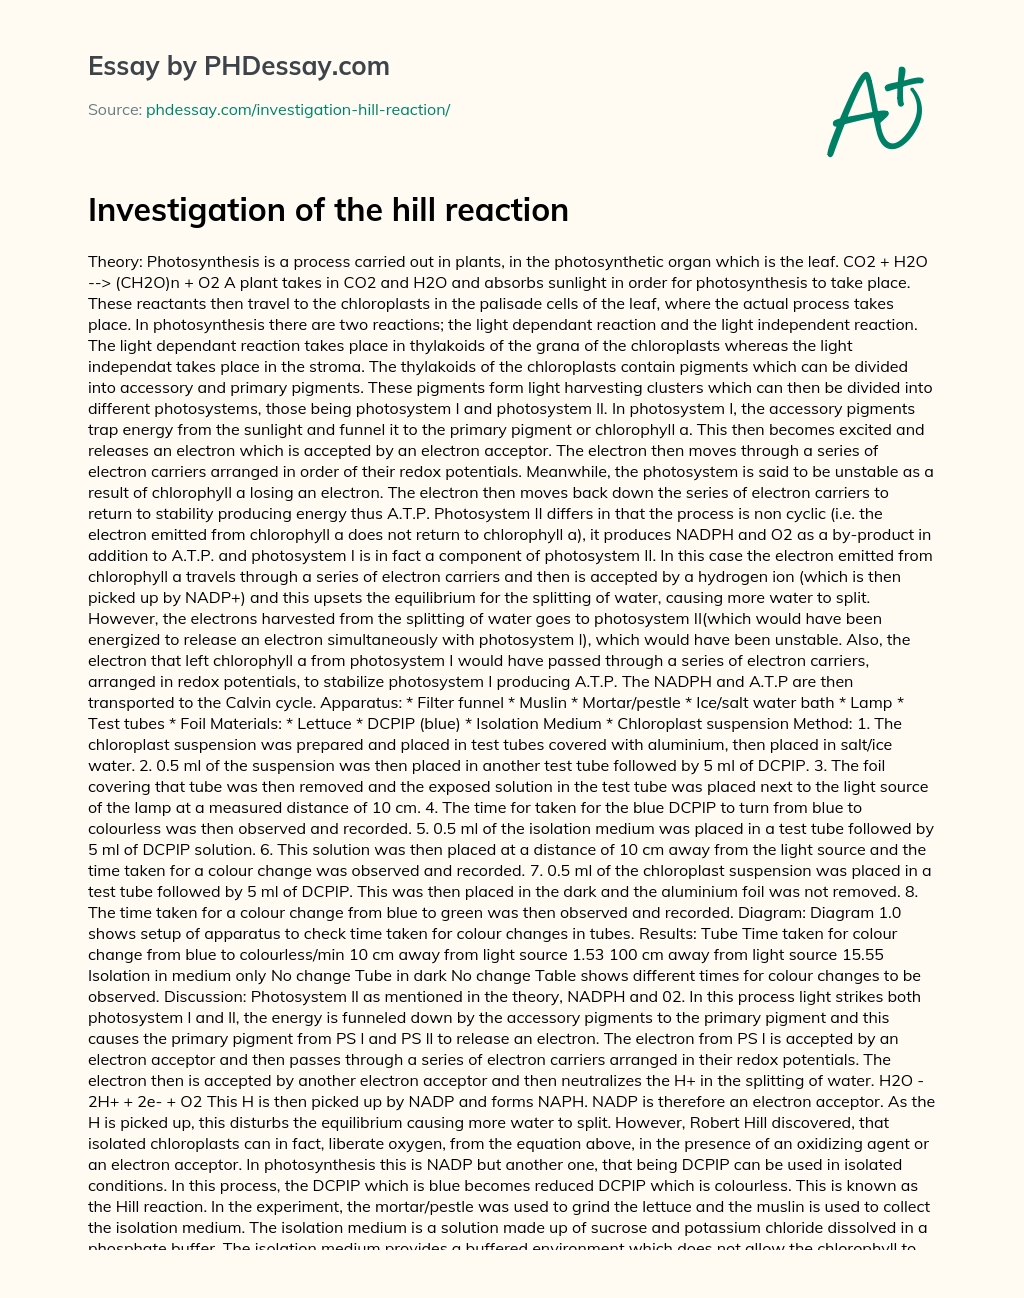 Investigation of the hill reaction essay